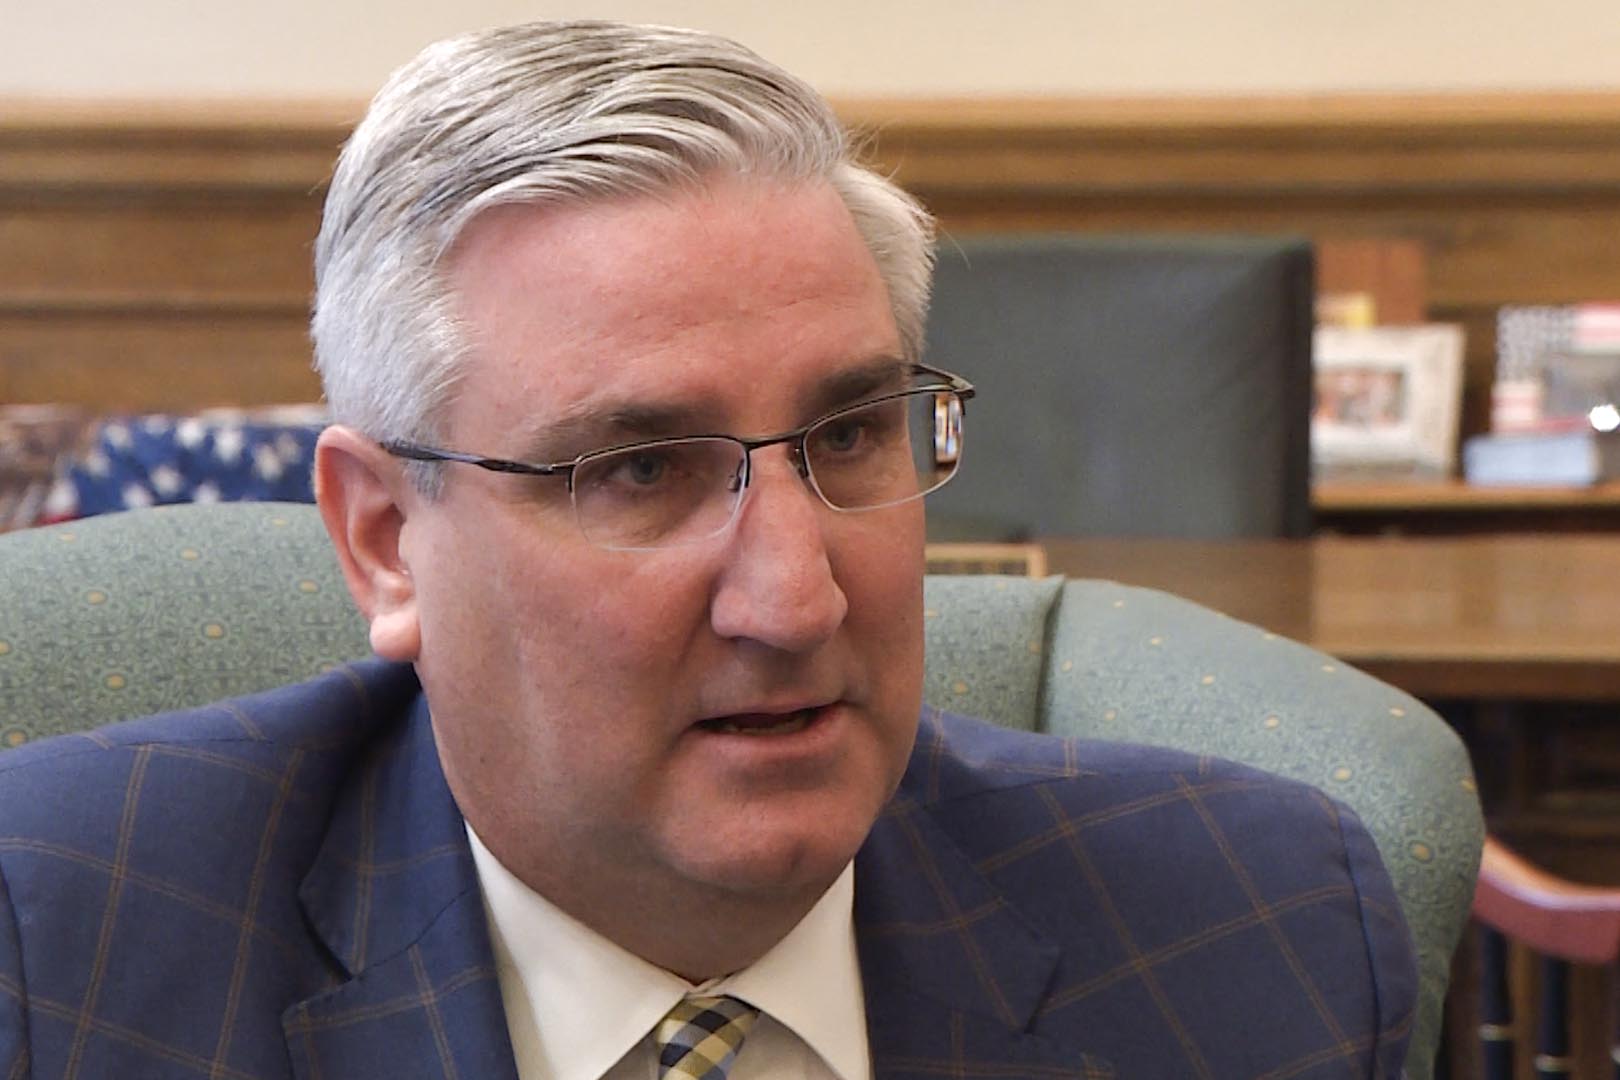 Holcomb On Holding Teacher Pay Until 2021: 'I Want To See The Numbers'